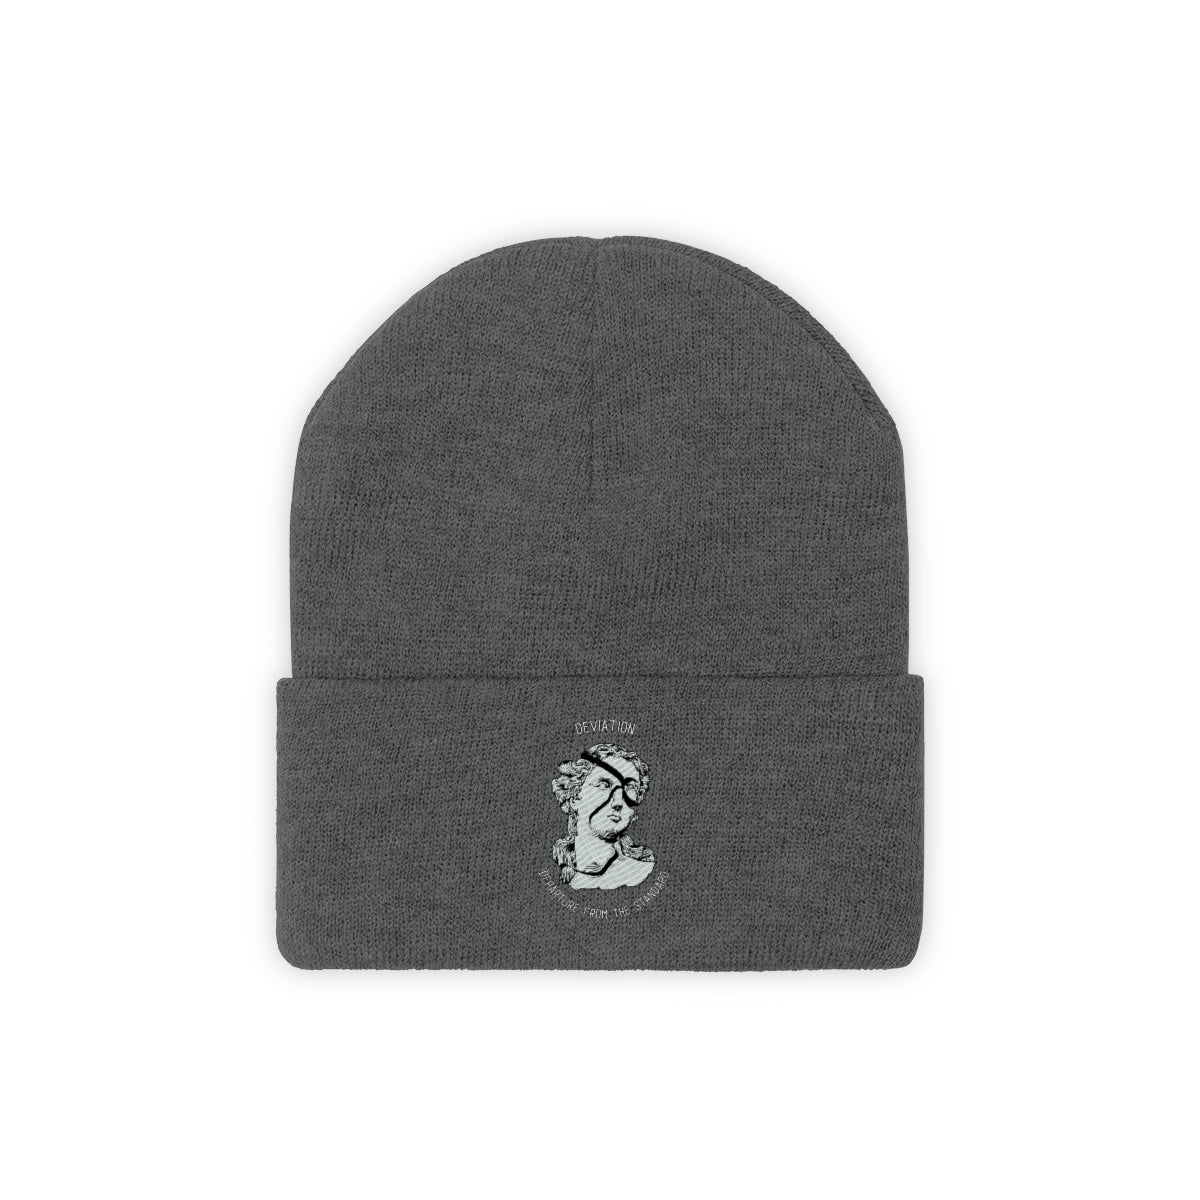 Departure From The Standard Beanie